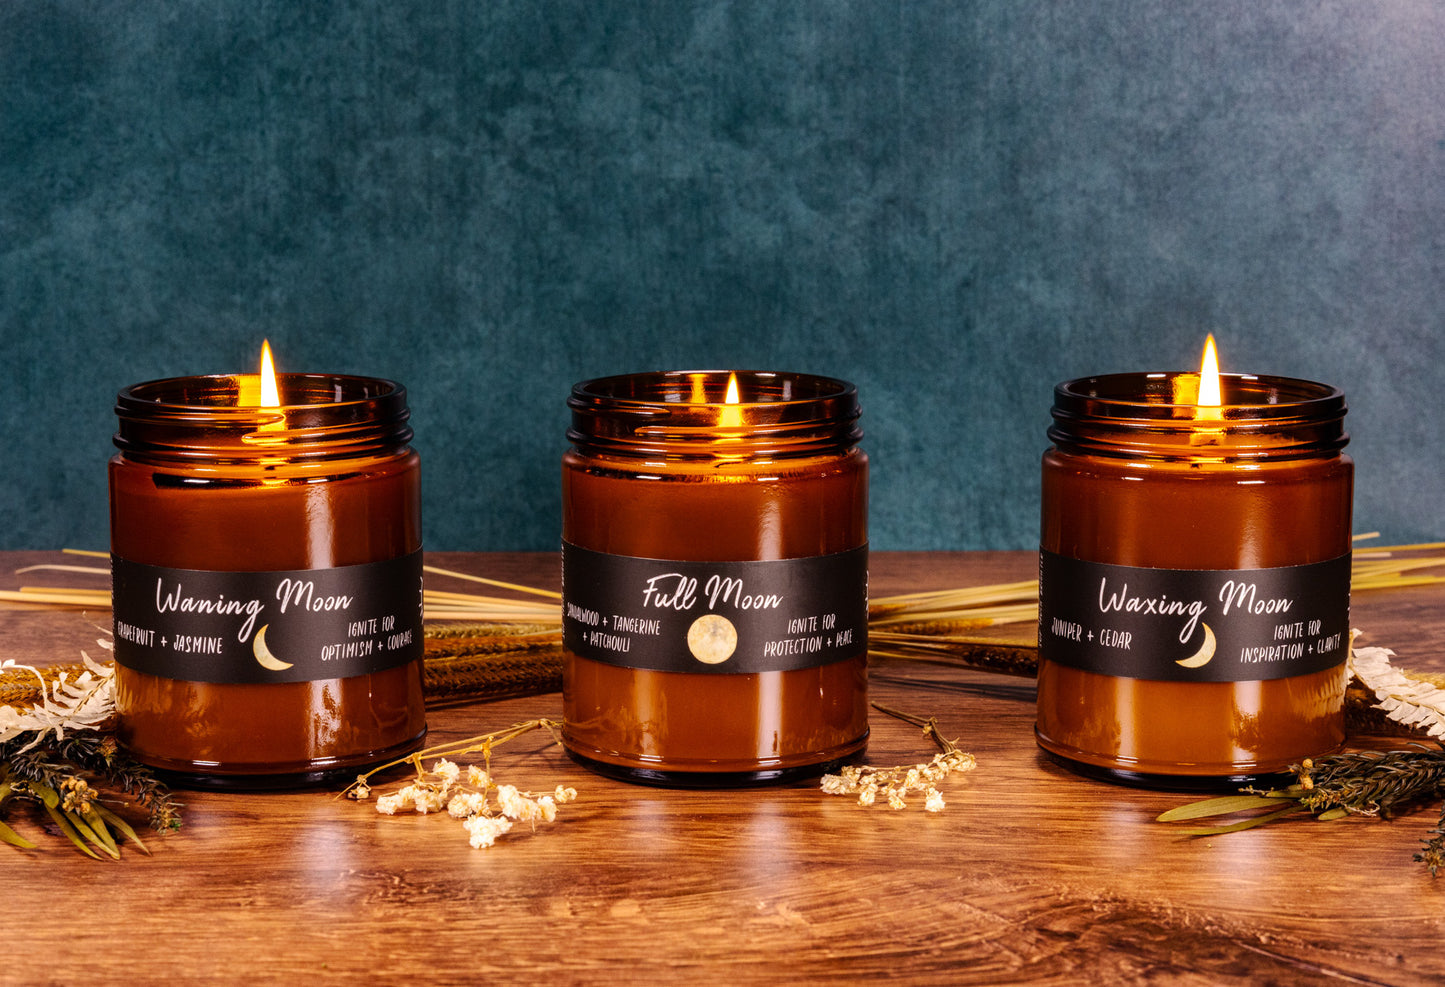 Soy moon candle in Boston, MA set of three.